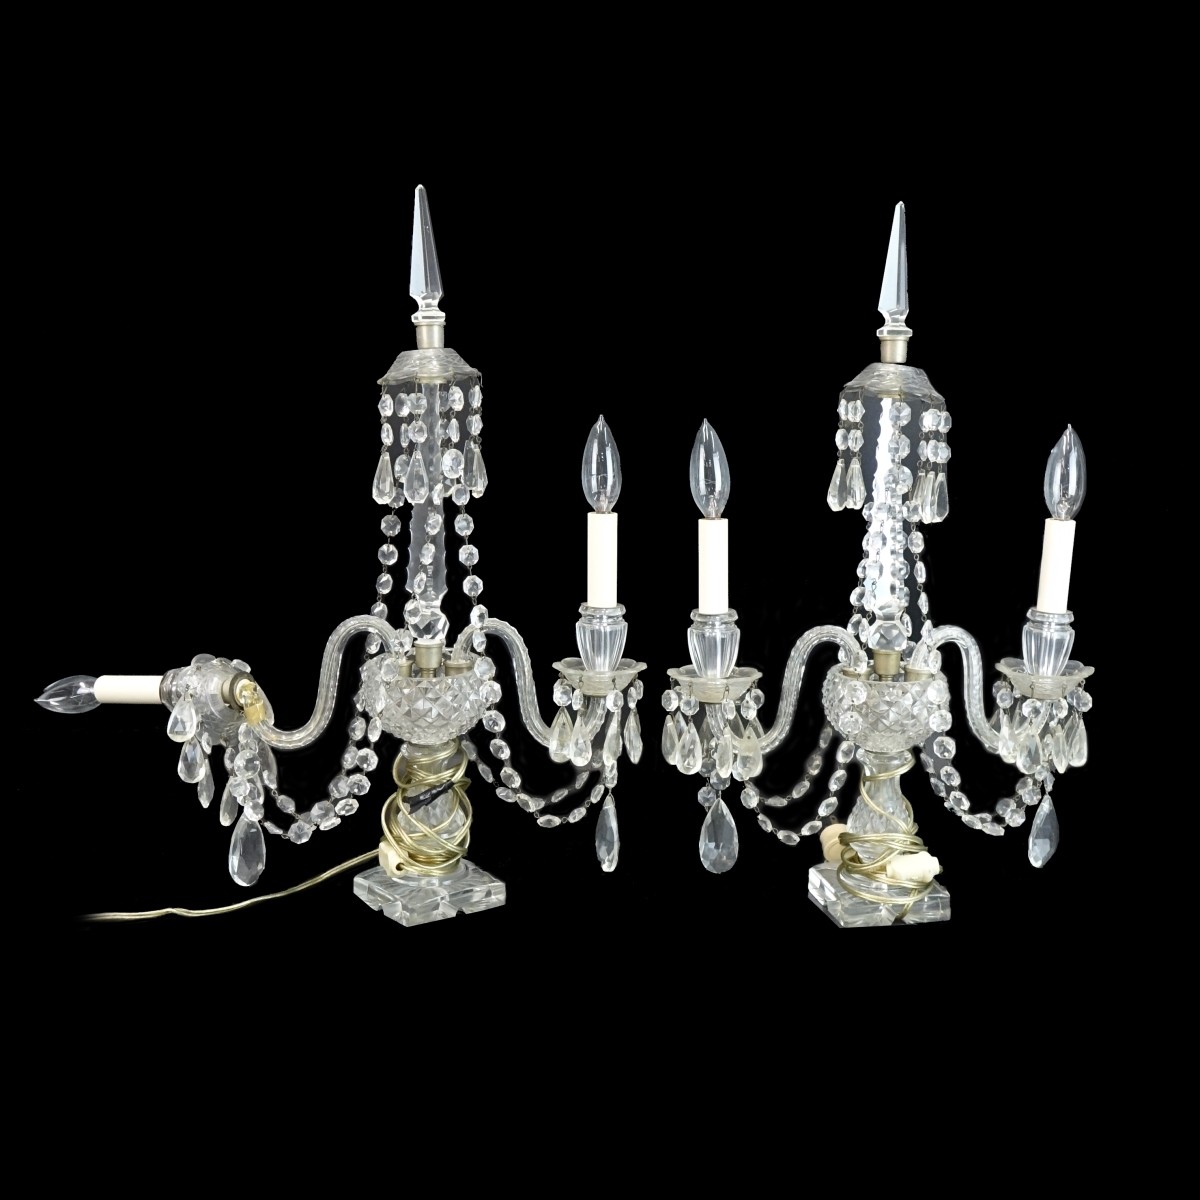 Pair of Candelabra lamps